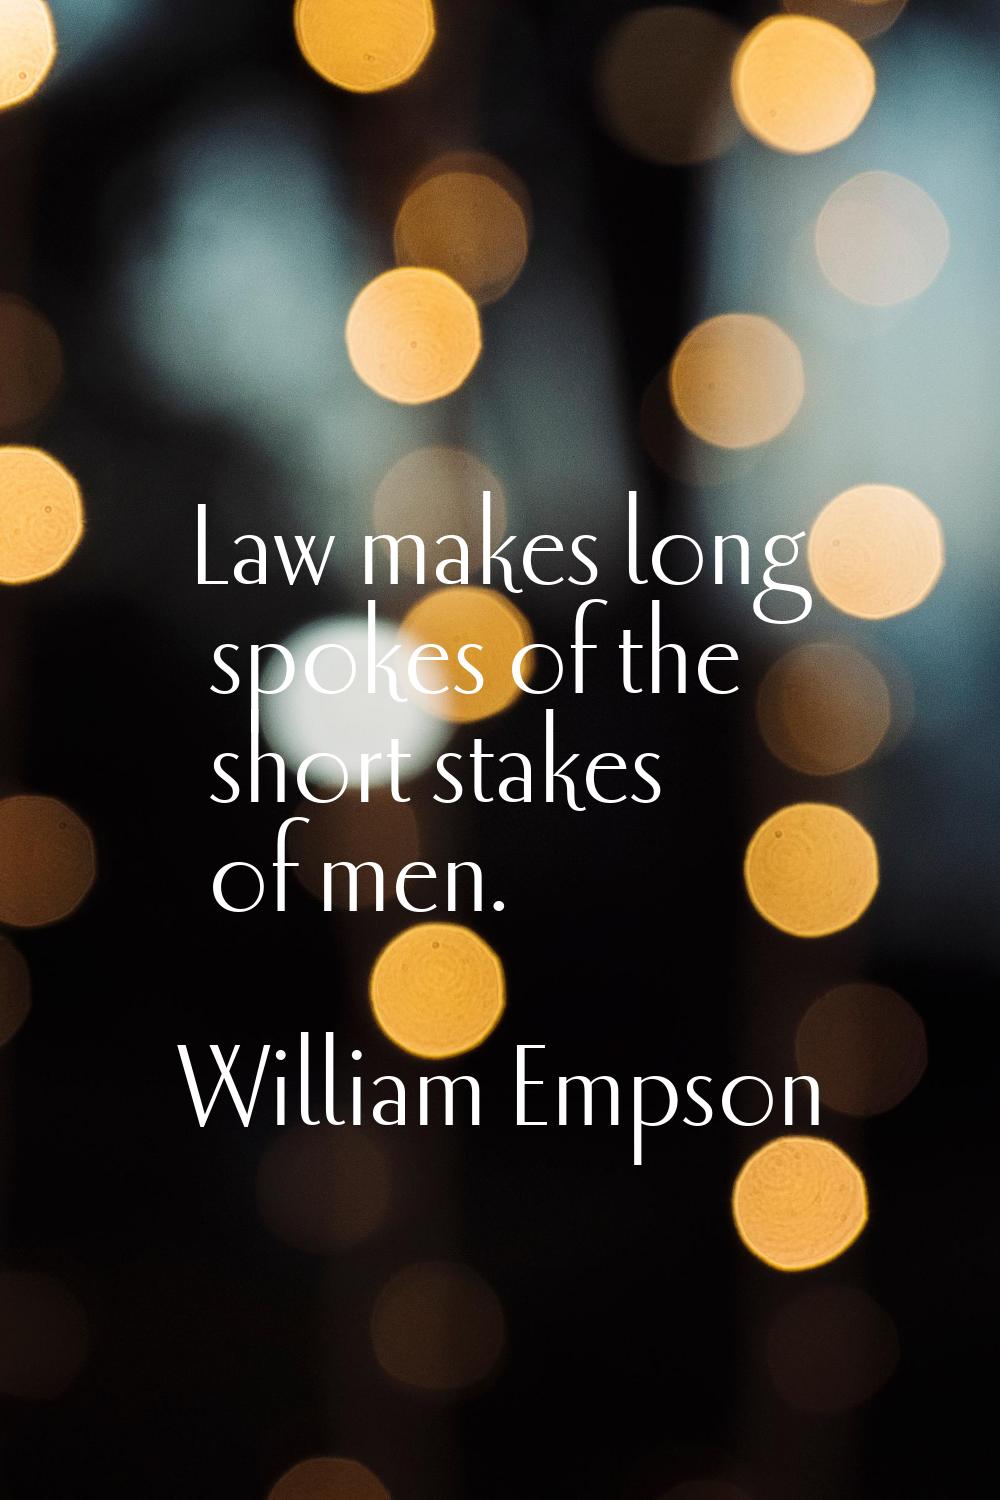 Law makes long spokes of the short stakes of men.